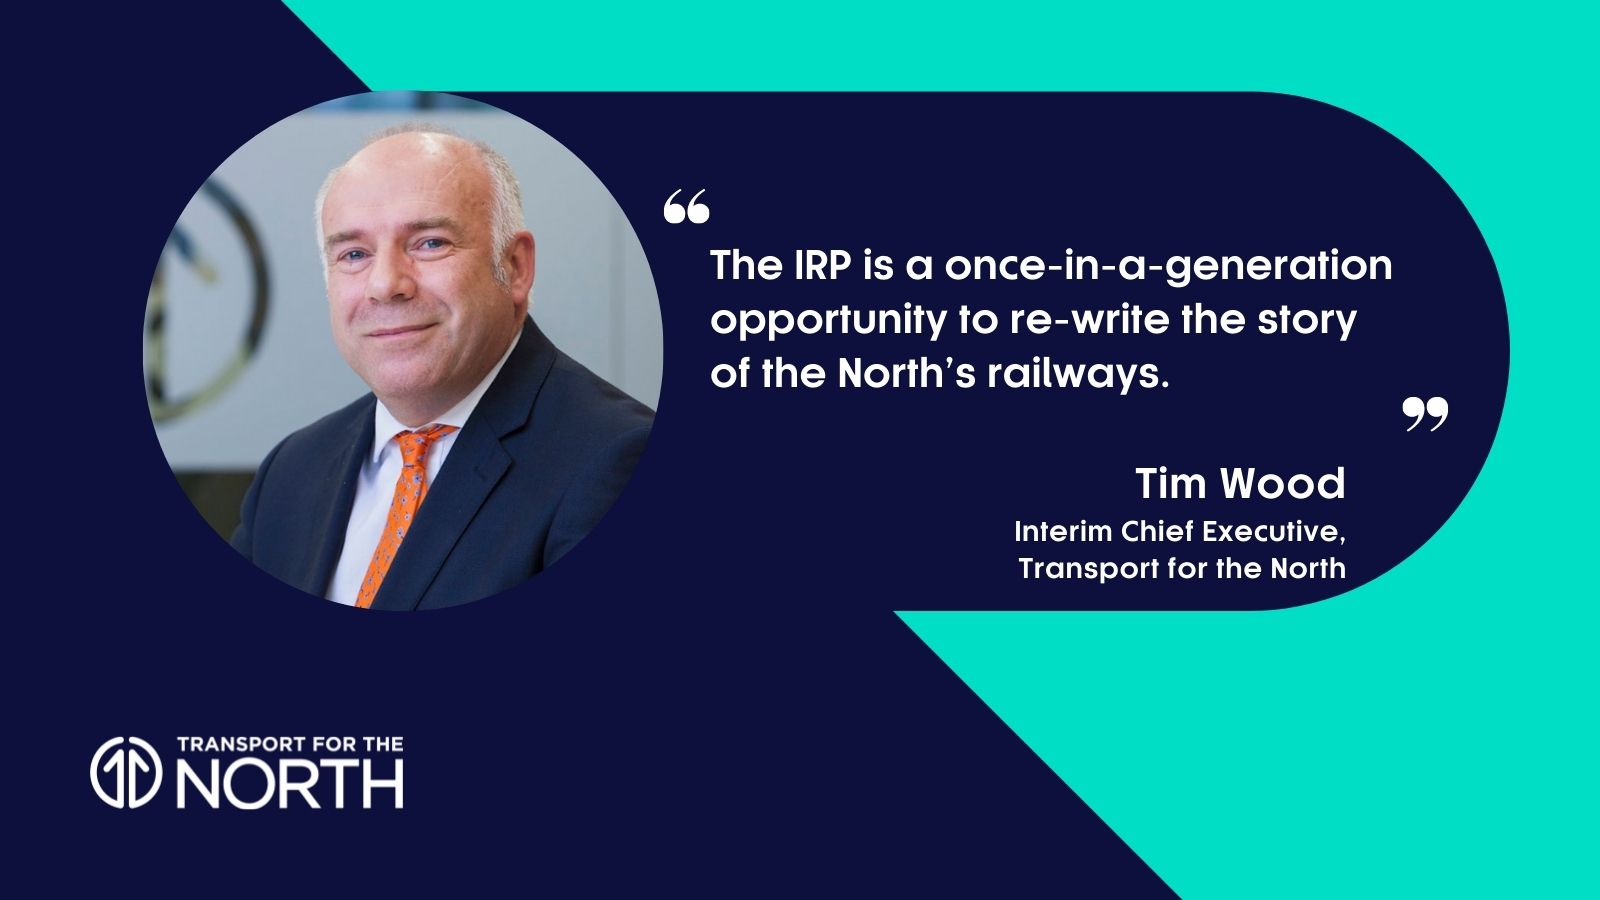 Tim Wood, Interim Chief Executive at Transport for the North, on the IRP